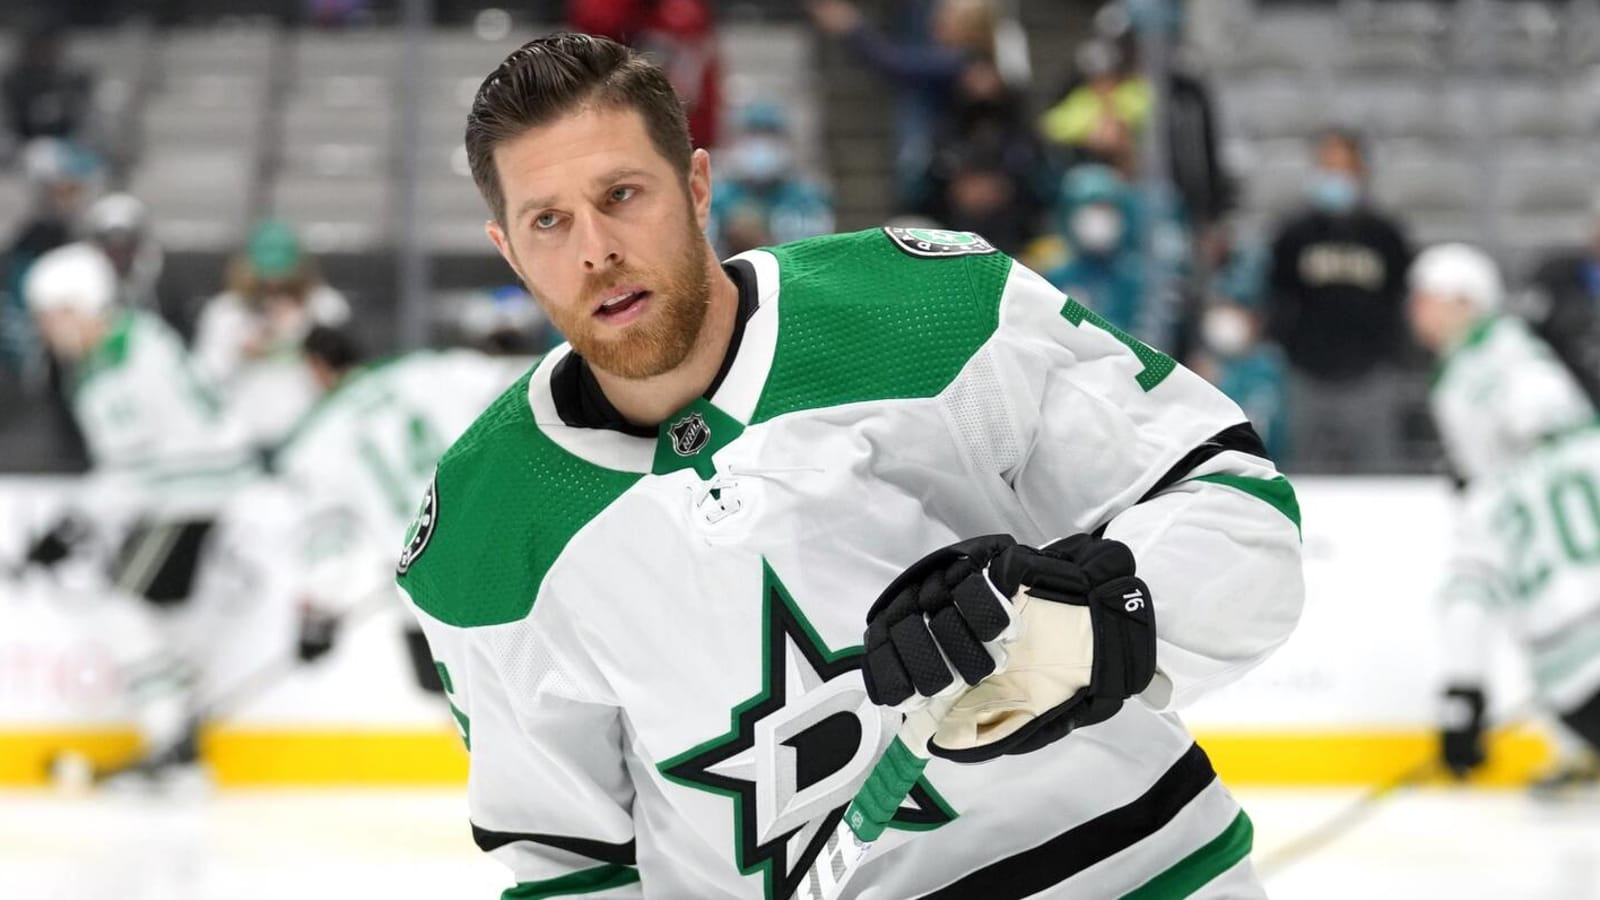 Joe Pavelski signs one-year, $5.5M deal to stay with Stars